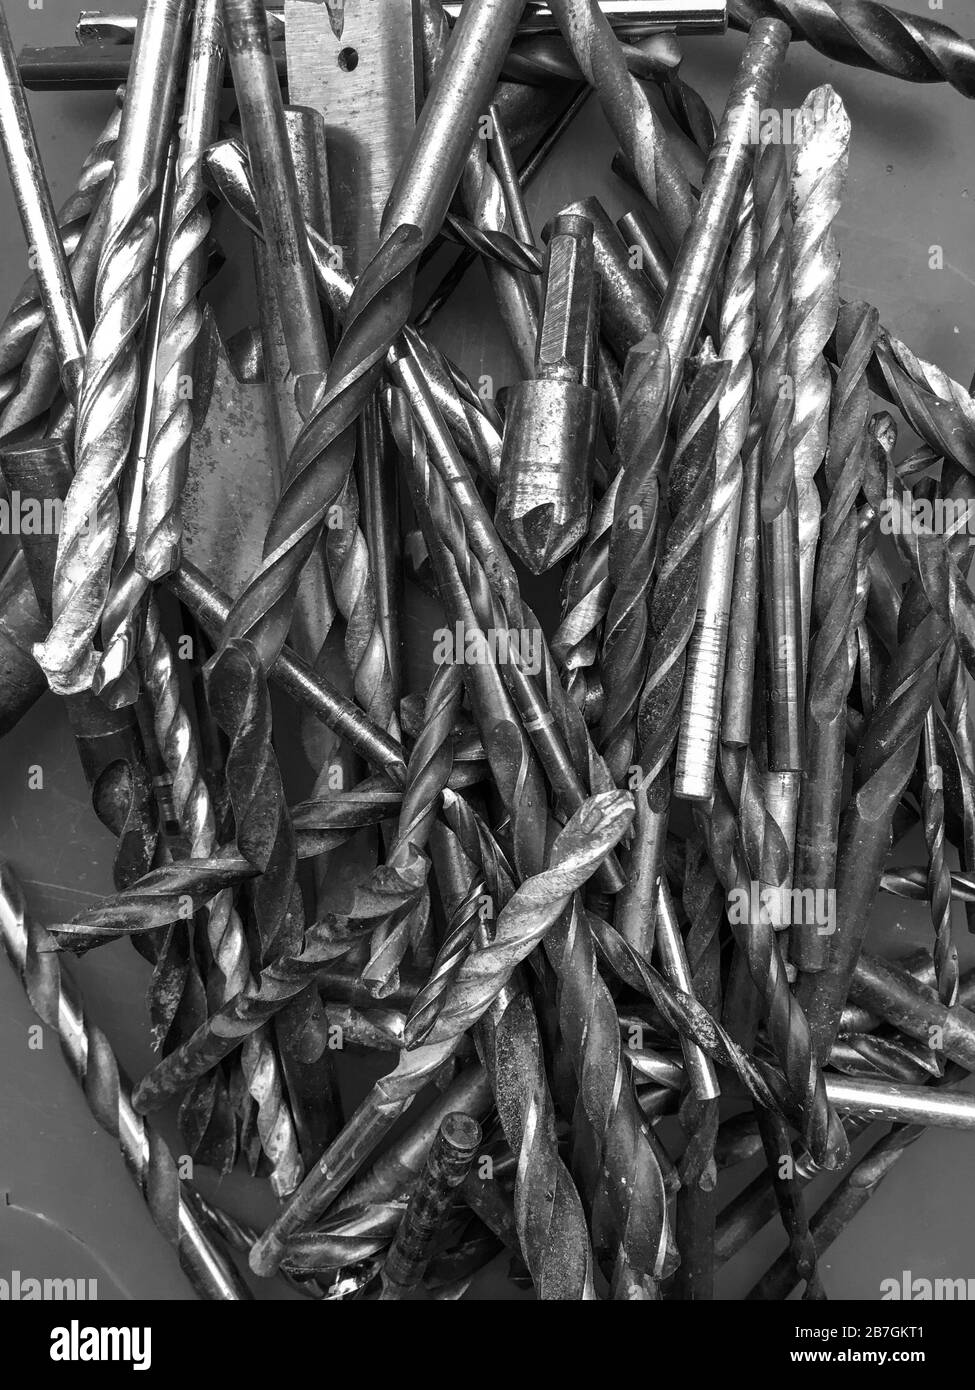 Used drill bits in a pile. A cutting tool for making holes in materials with power or hand drills. A collection found in a garage during a DIY session Stock Photo